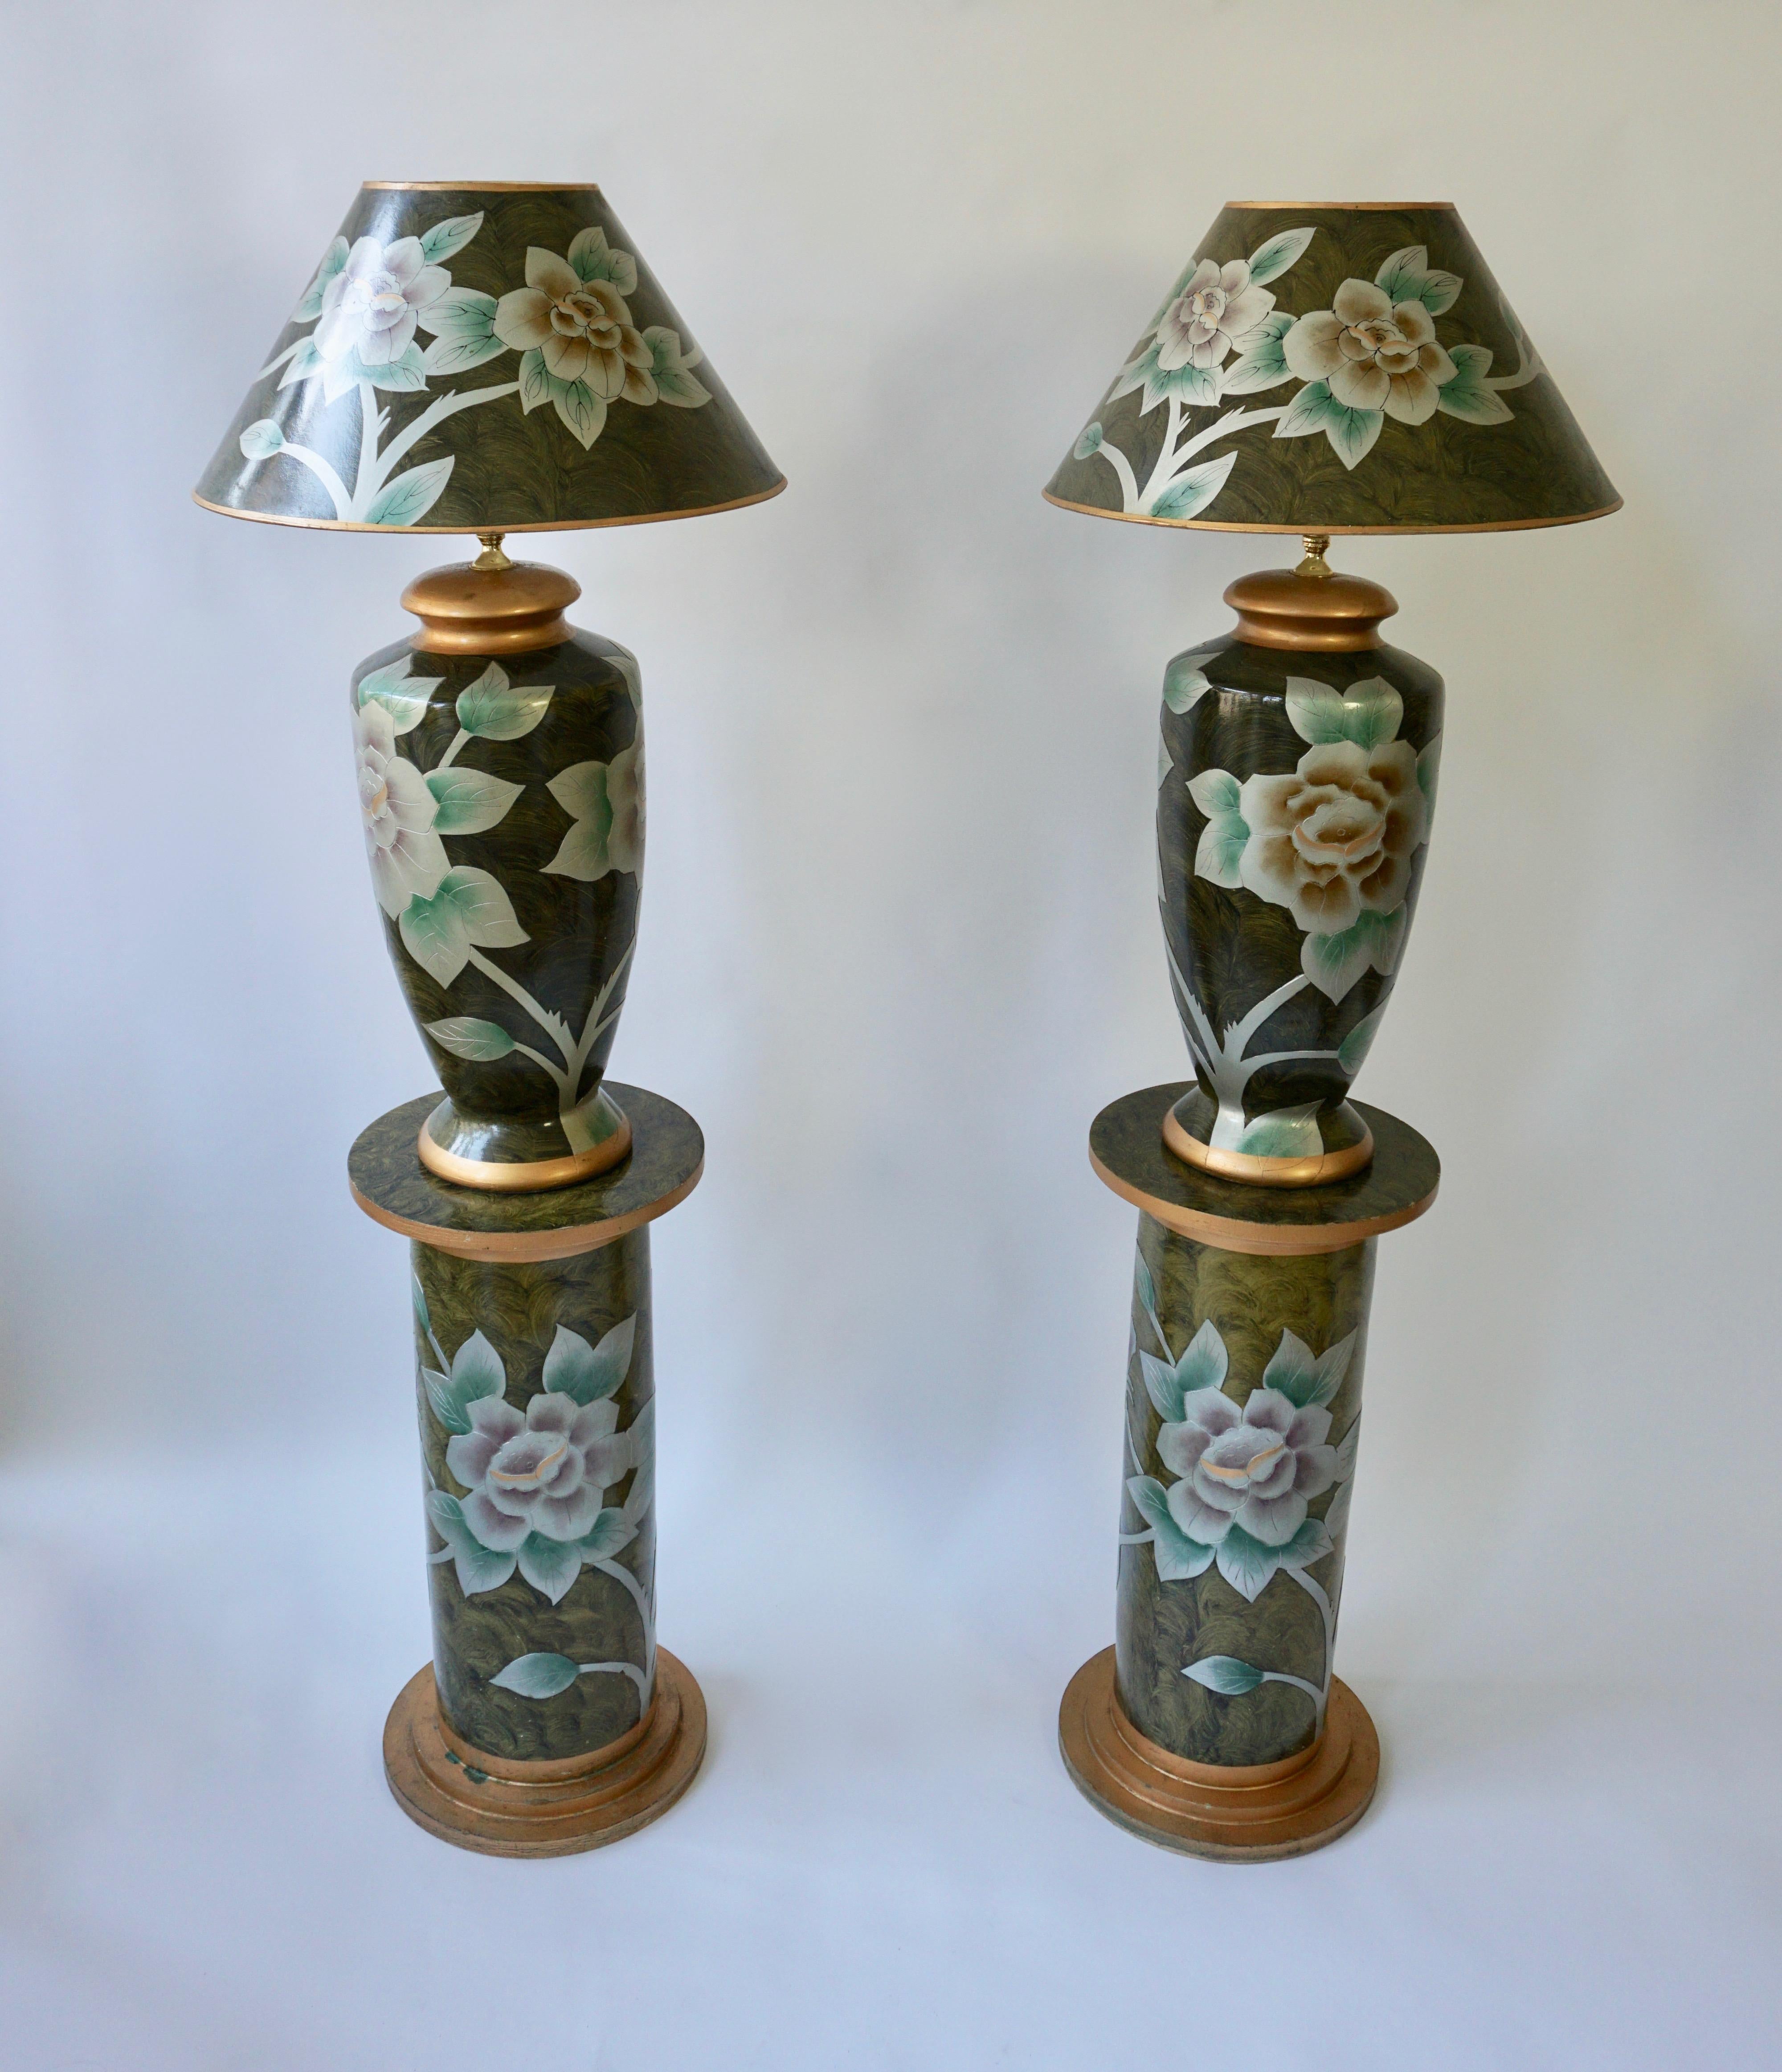 Two beautiful terracotta table lamps on two pedestals. Italy, 1970s.

Measures:
 Height table lamp 88 cm, diameter 50 cm.
Height pedestal 69 cm, diameter 33 cm.
Total height 157 cm.
One E27 bulb.